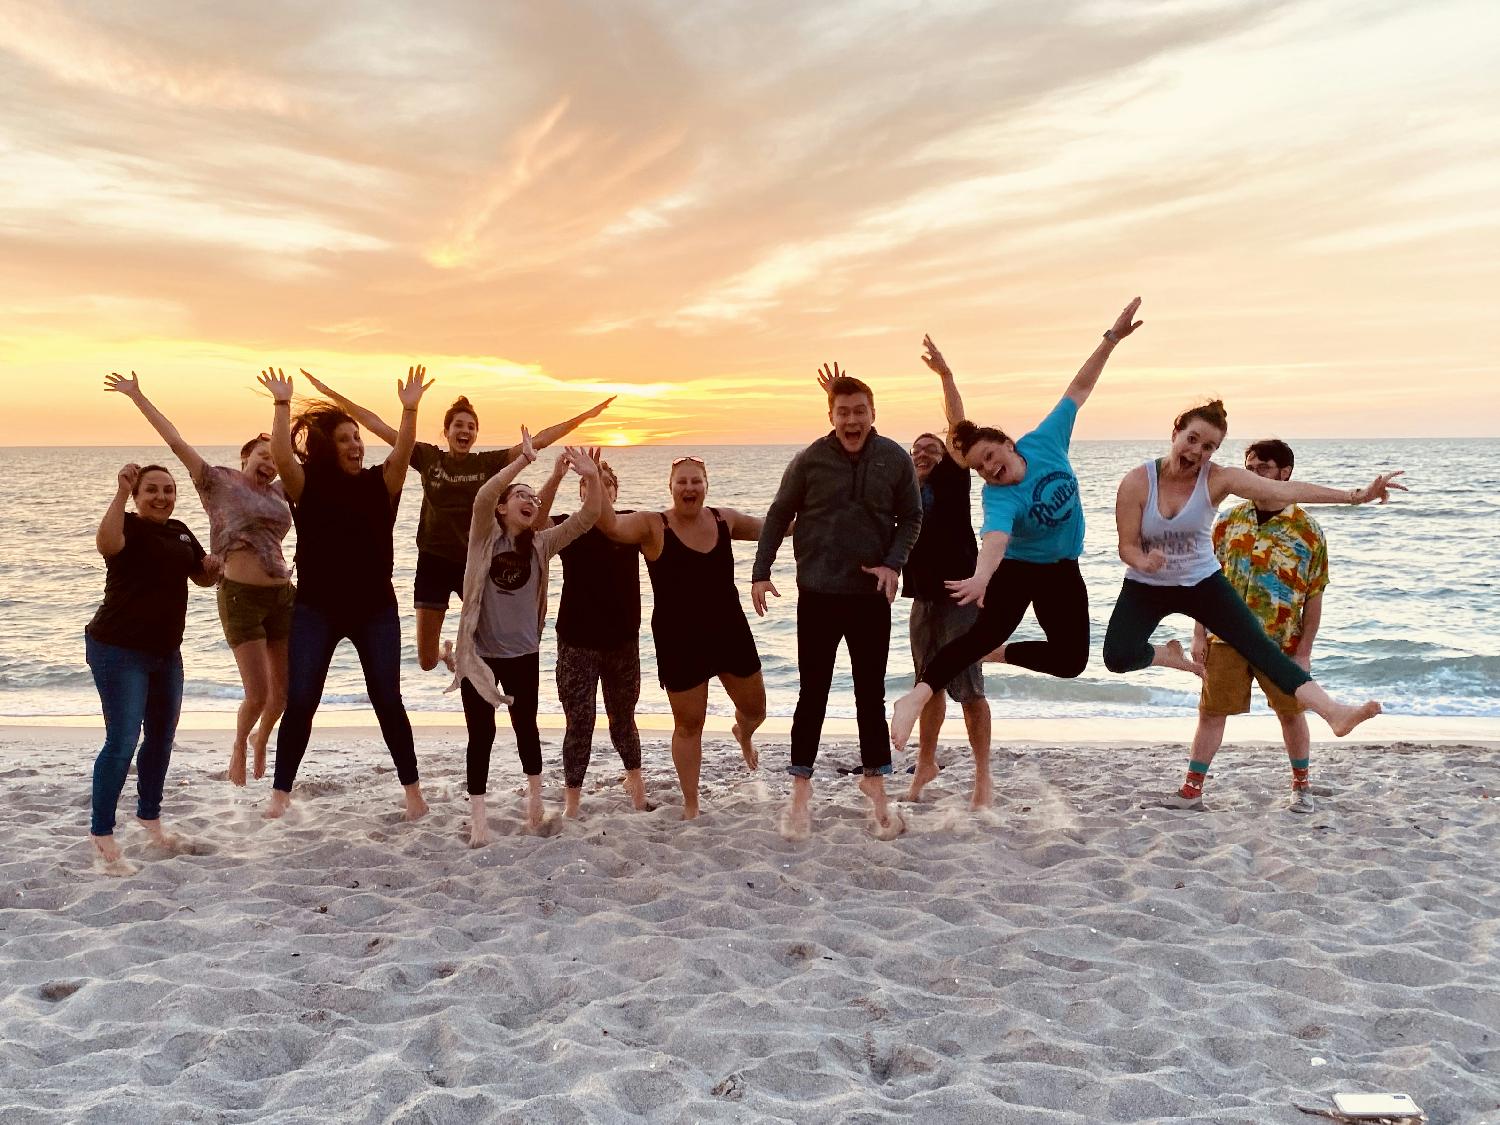 Most of the team on the beach in Captiva, FL. We rented a mansion, flew down, and celebrated hitting one of our company milestones. So much fun!